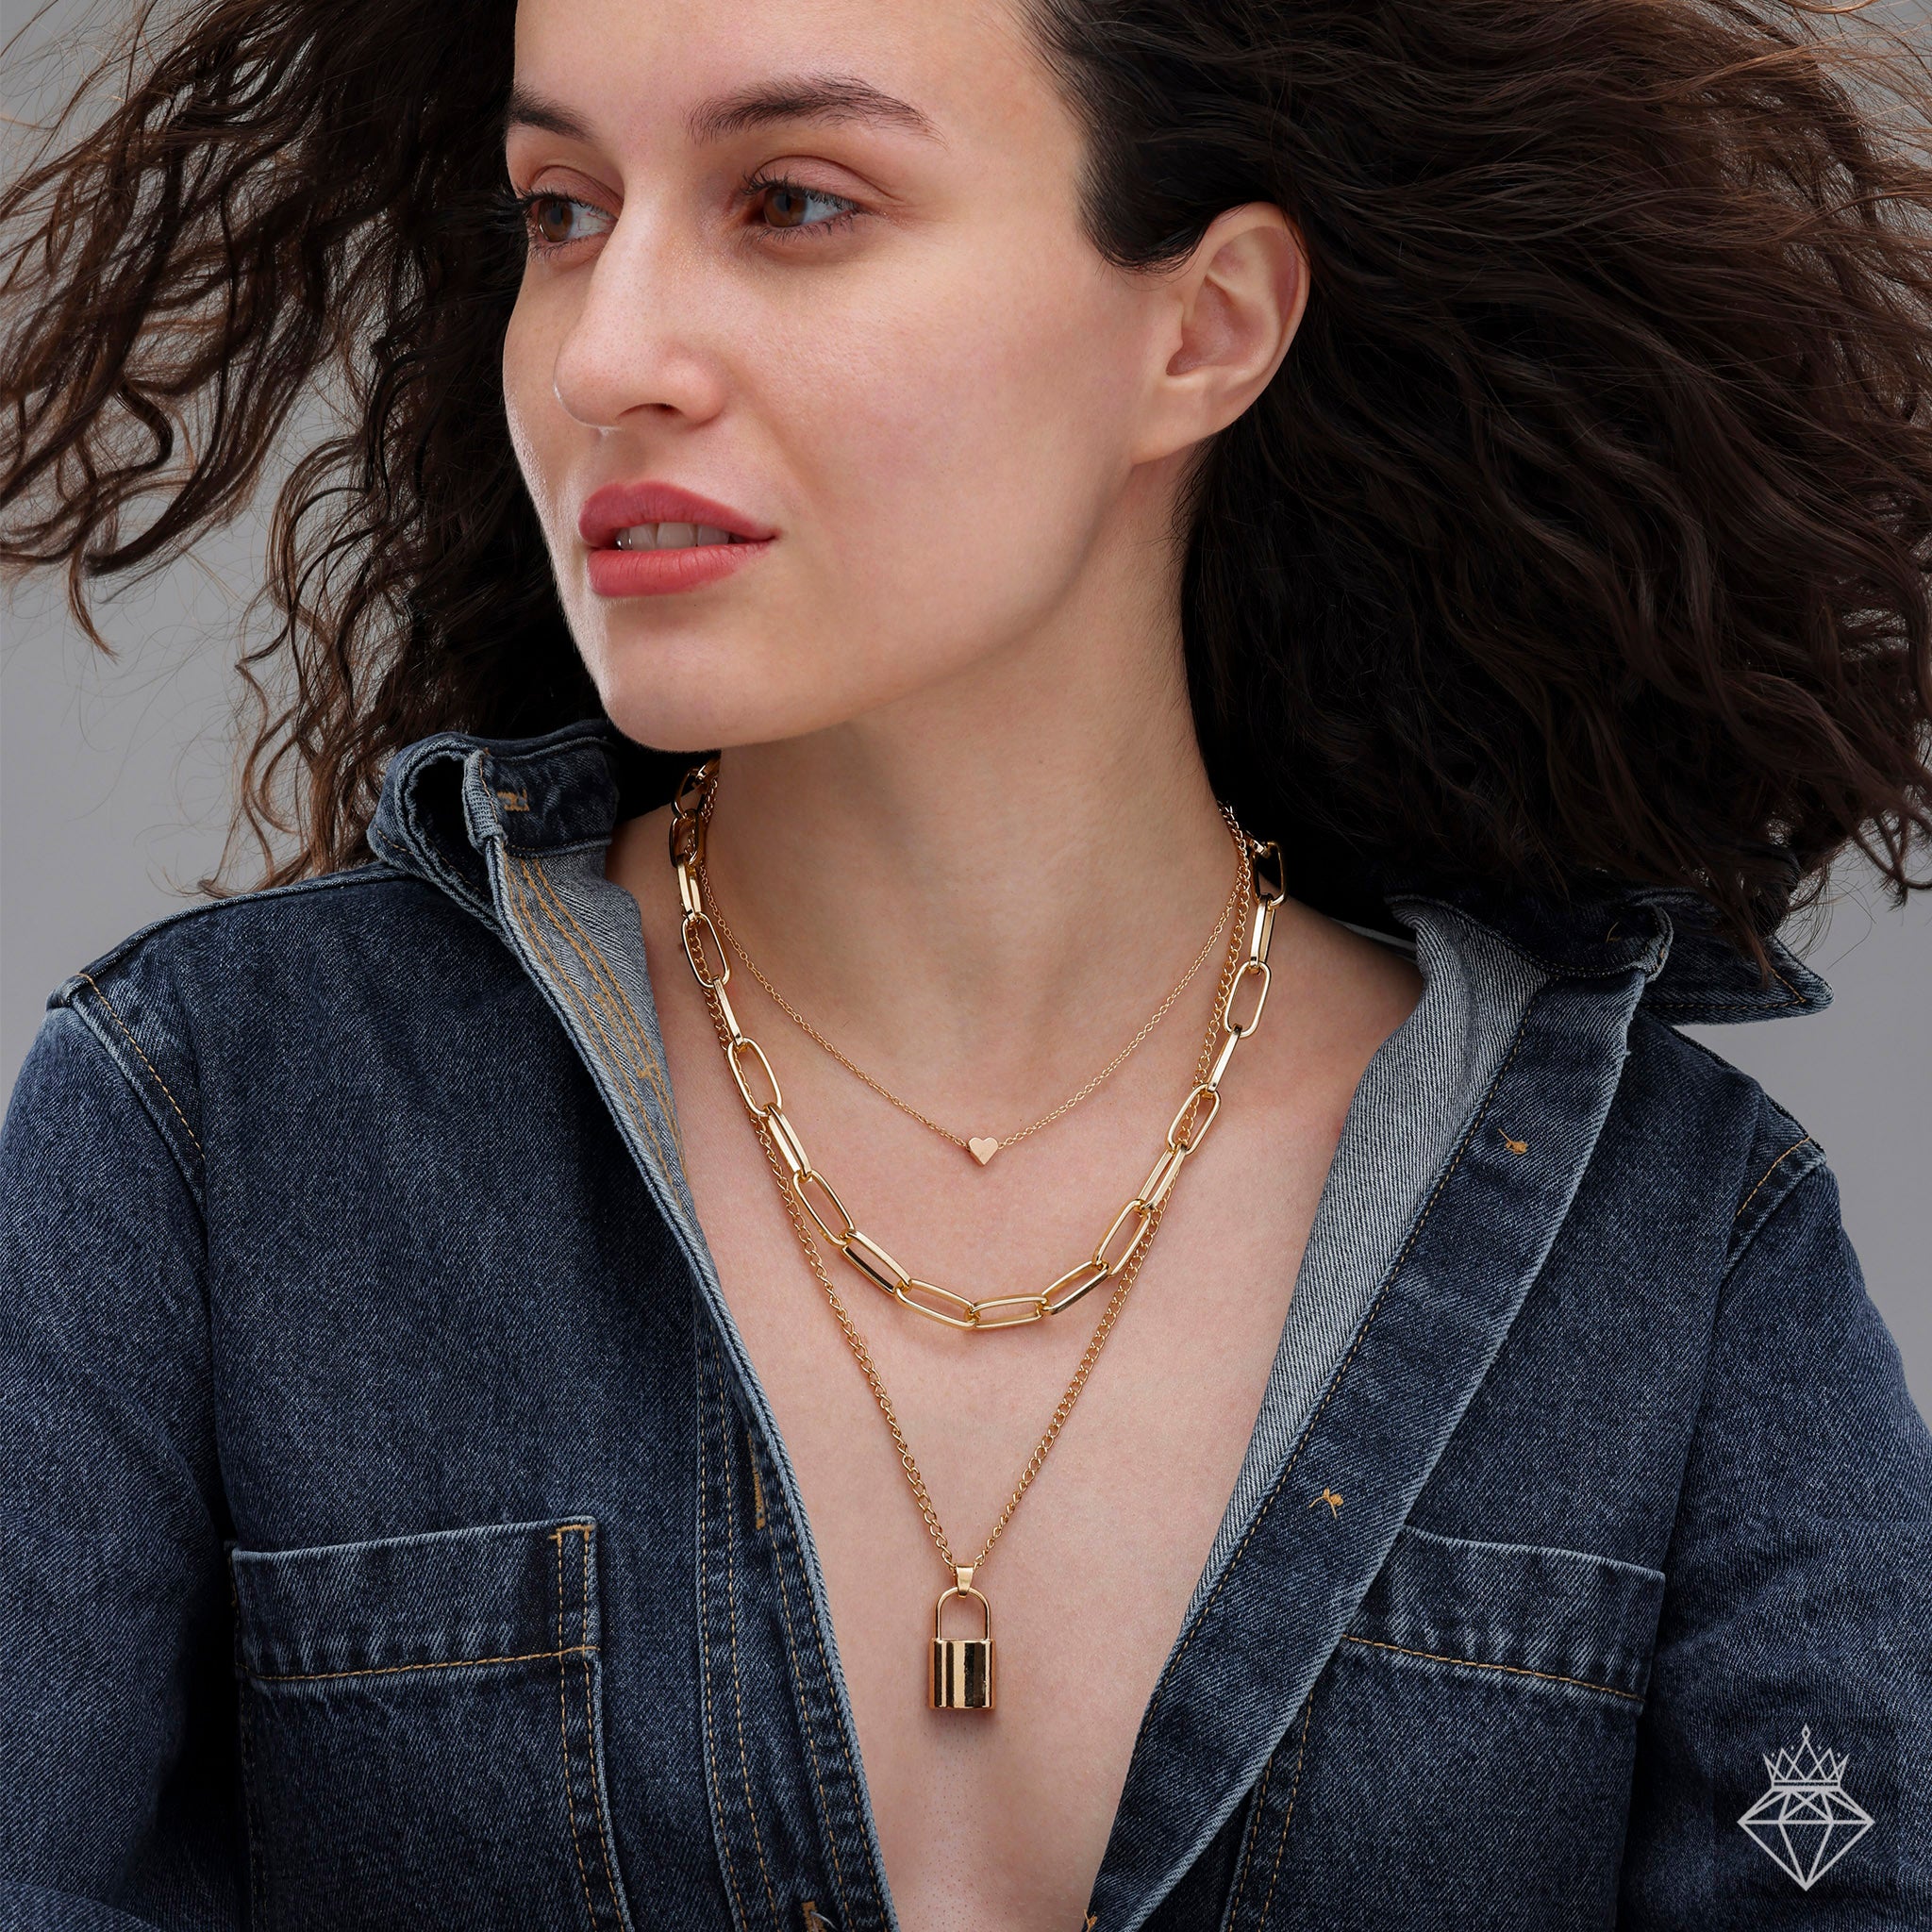 PRAO Lock Charm Hanging on Layered Chain Necklace